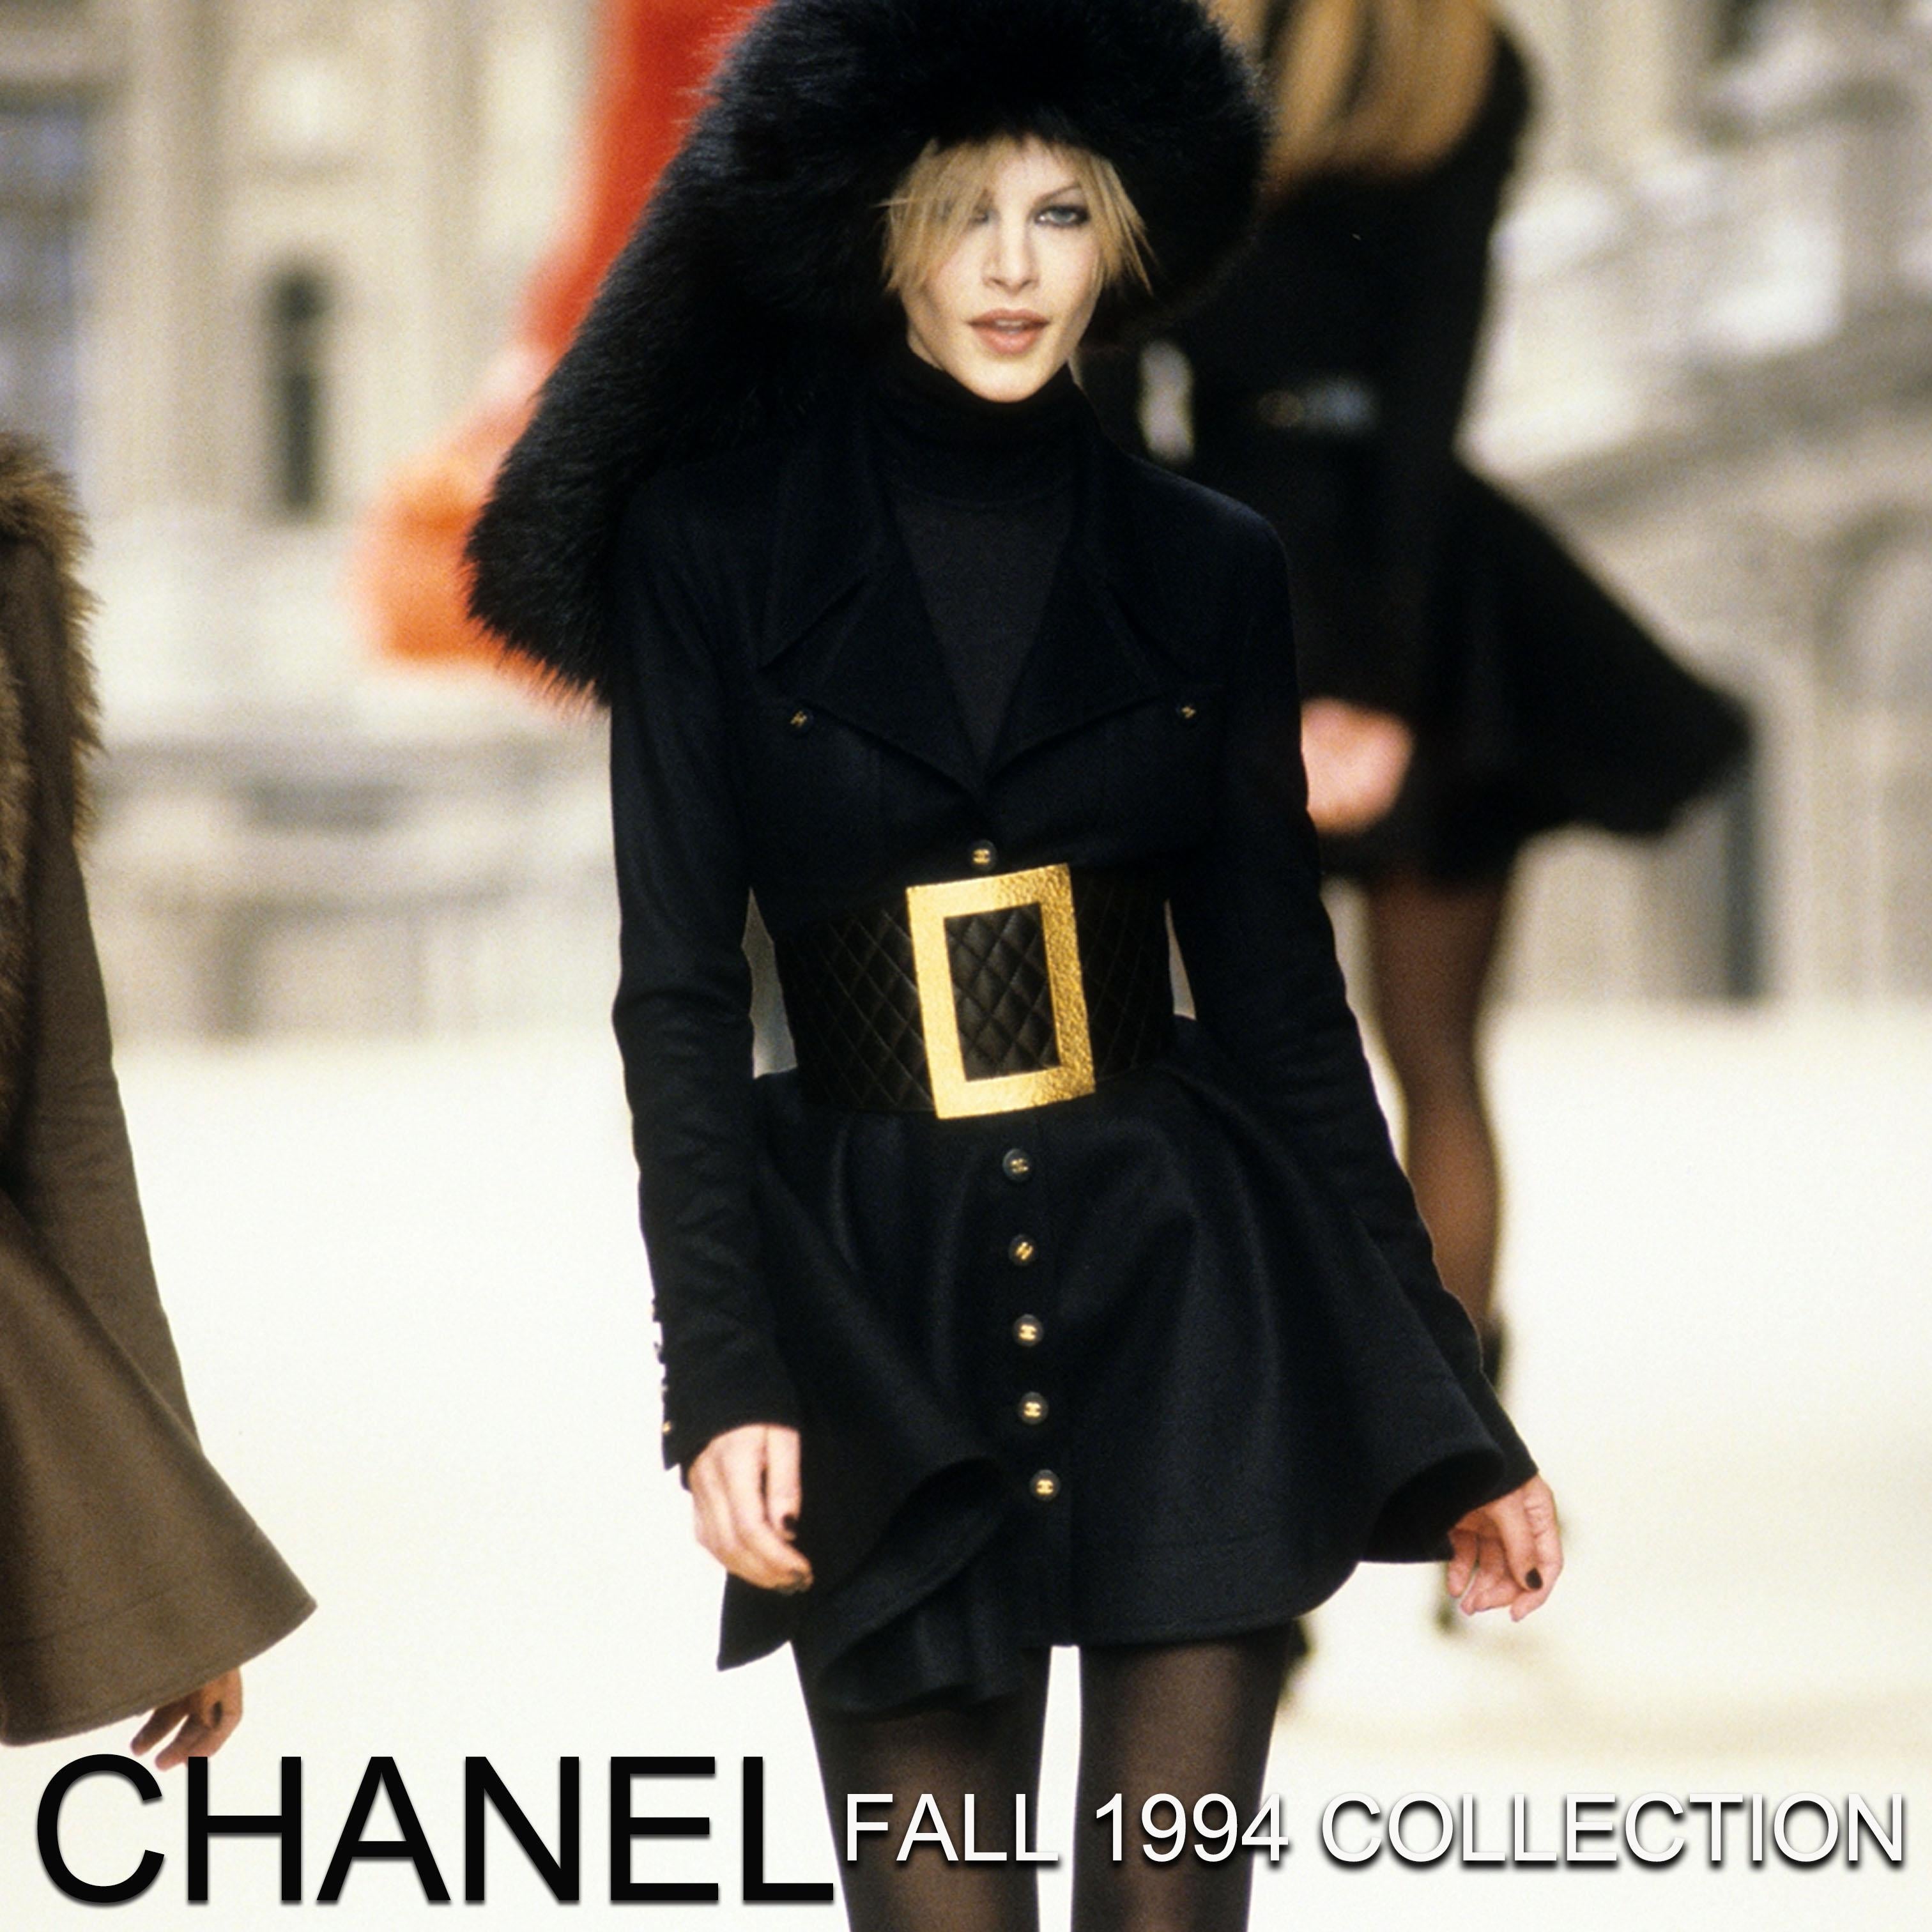 Authentic, preowned, vintage F/W 1994 Chanel EXTRA Wide Matelasse Corset Belt stamped size 85/34. Super rare archive piece as shown on the F/W '94 runway, perfect for collectors.  Made from Matelasse stitched calfskin, it features an oversized